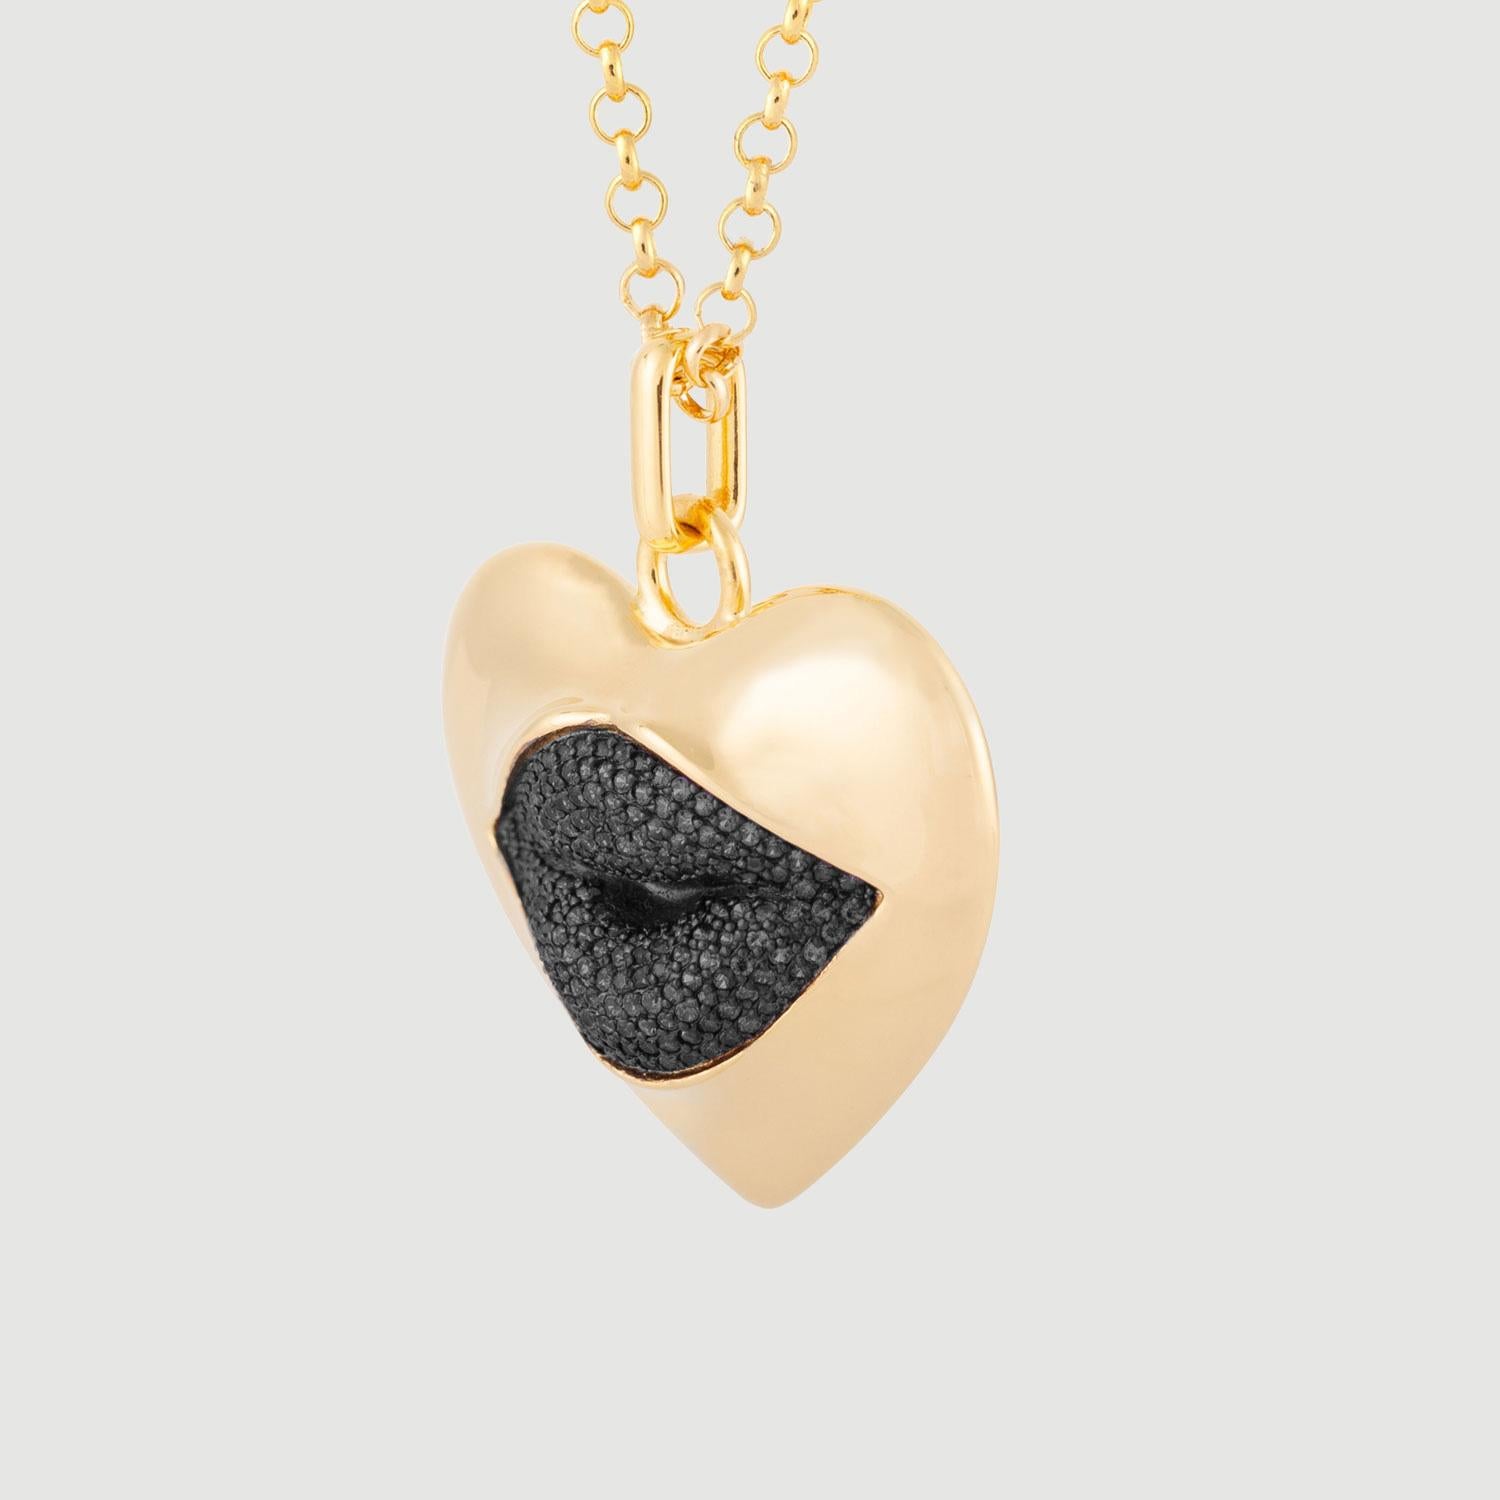 Love starts with the heart and lasts on the lips. This might be the sexiest necklace ever! Our sexy gold statement heart necklace with a black diamond kiss. Shine your love on!

Composition: Sterling silver, 18K gold vermeil, Rhodium plated
Color: